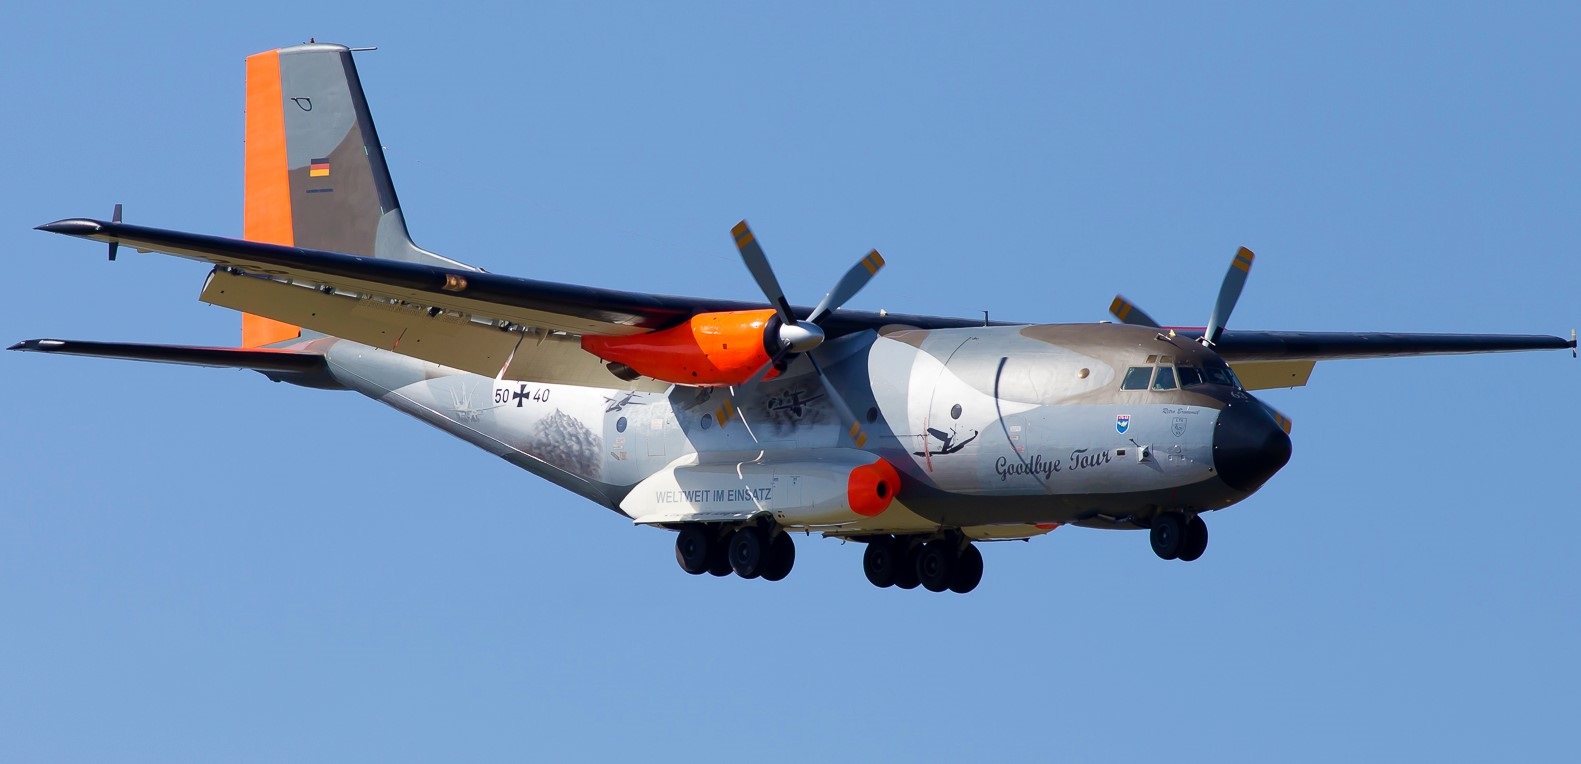 Last C-160 Transall has been retired by Luftwaffe - The German Air Force Today , Airbus A400M